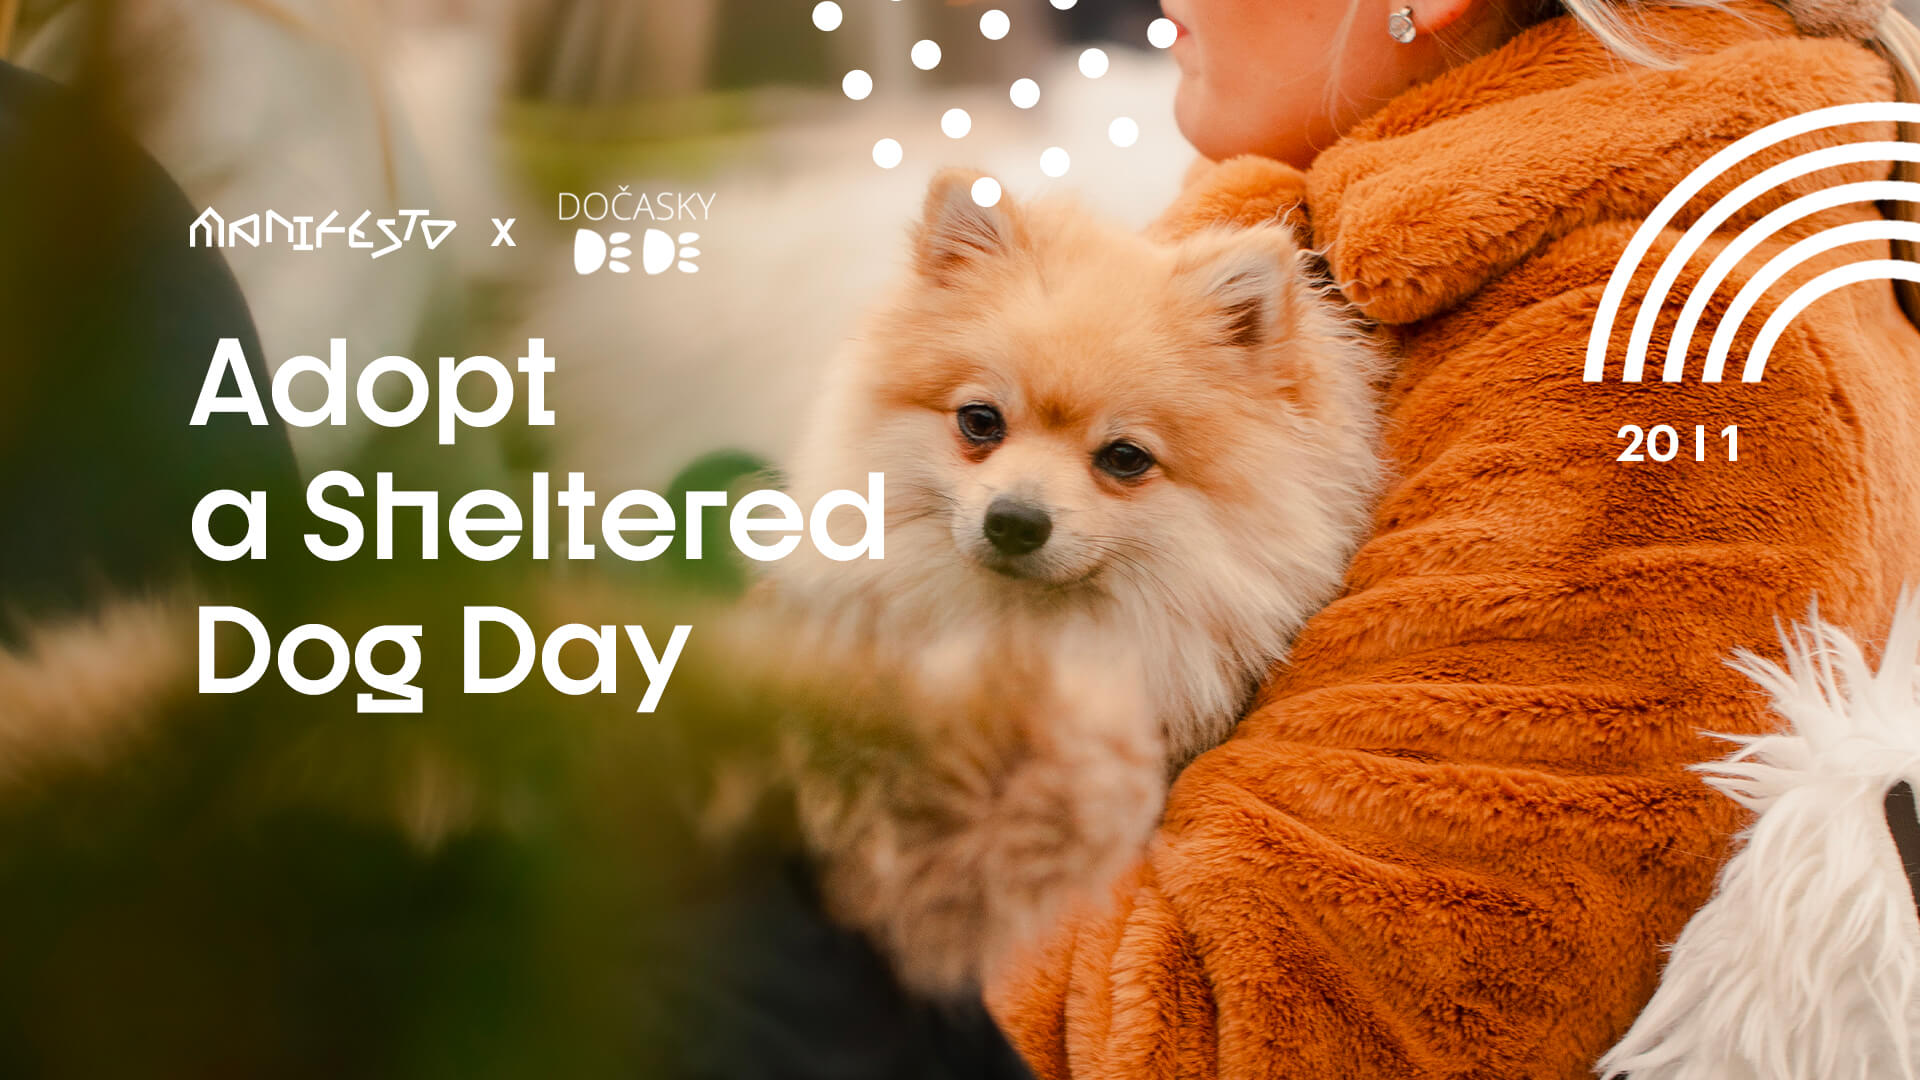 Adopt a Sheltered Dog Day